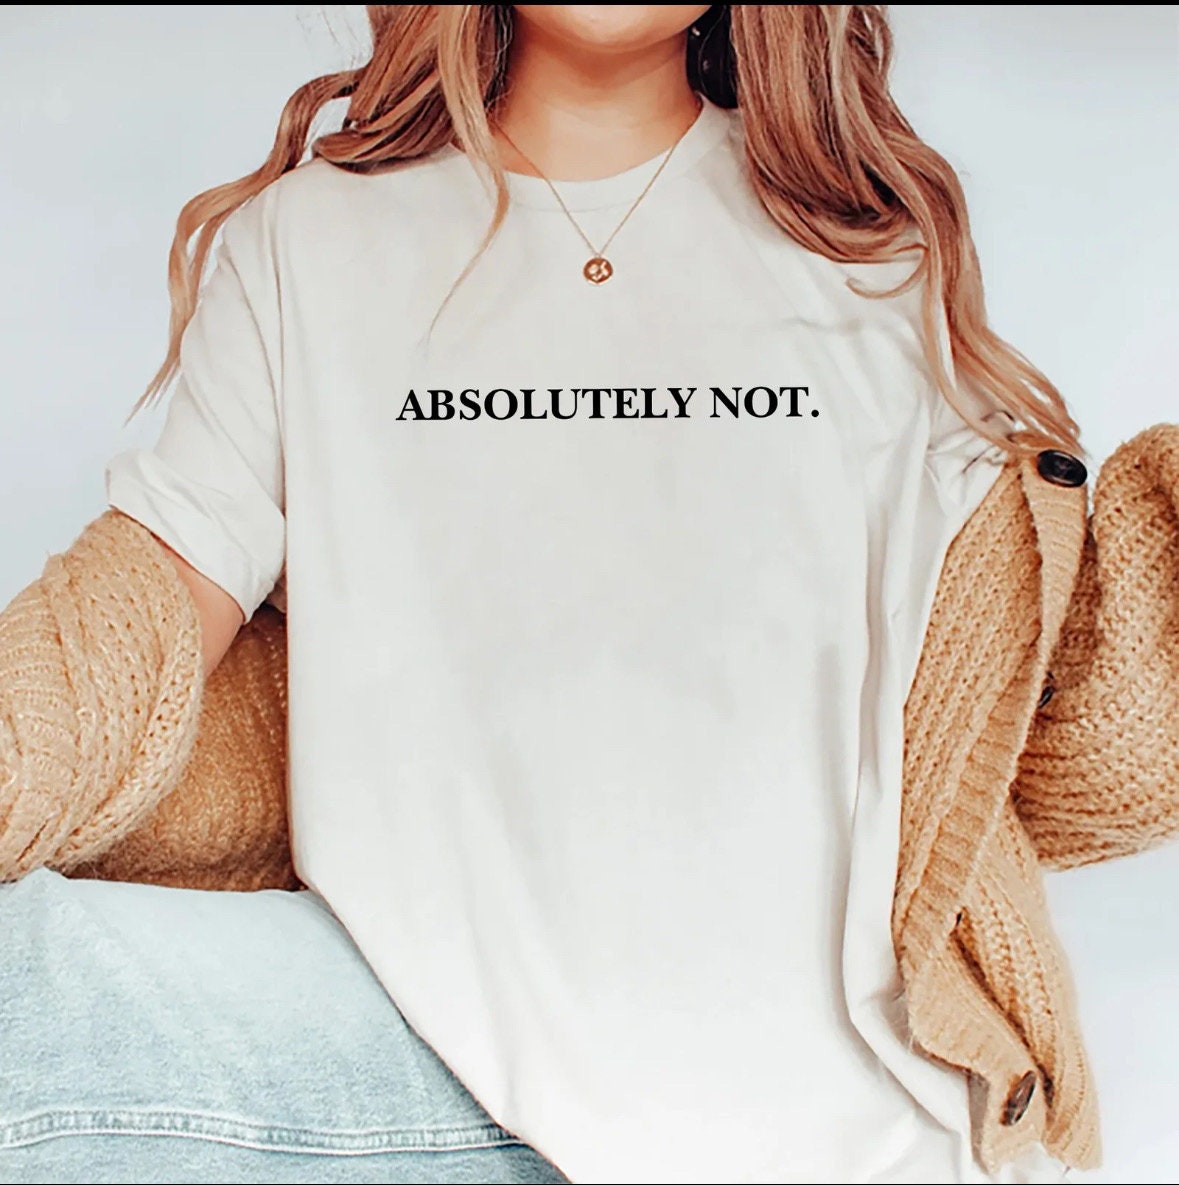 Absolutely Not Statement Shirt for Confident and Free-Spirited Individuals